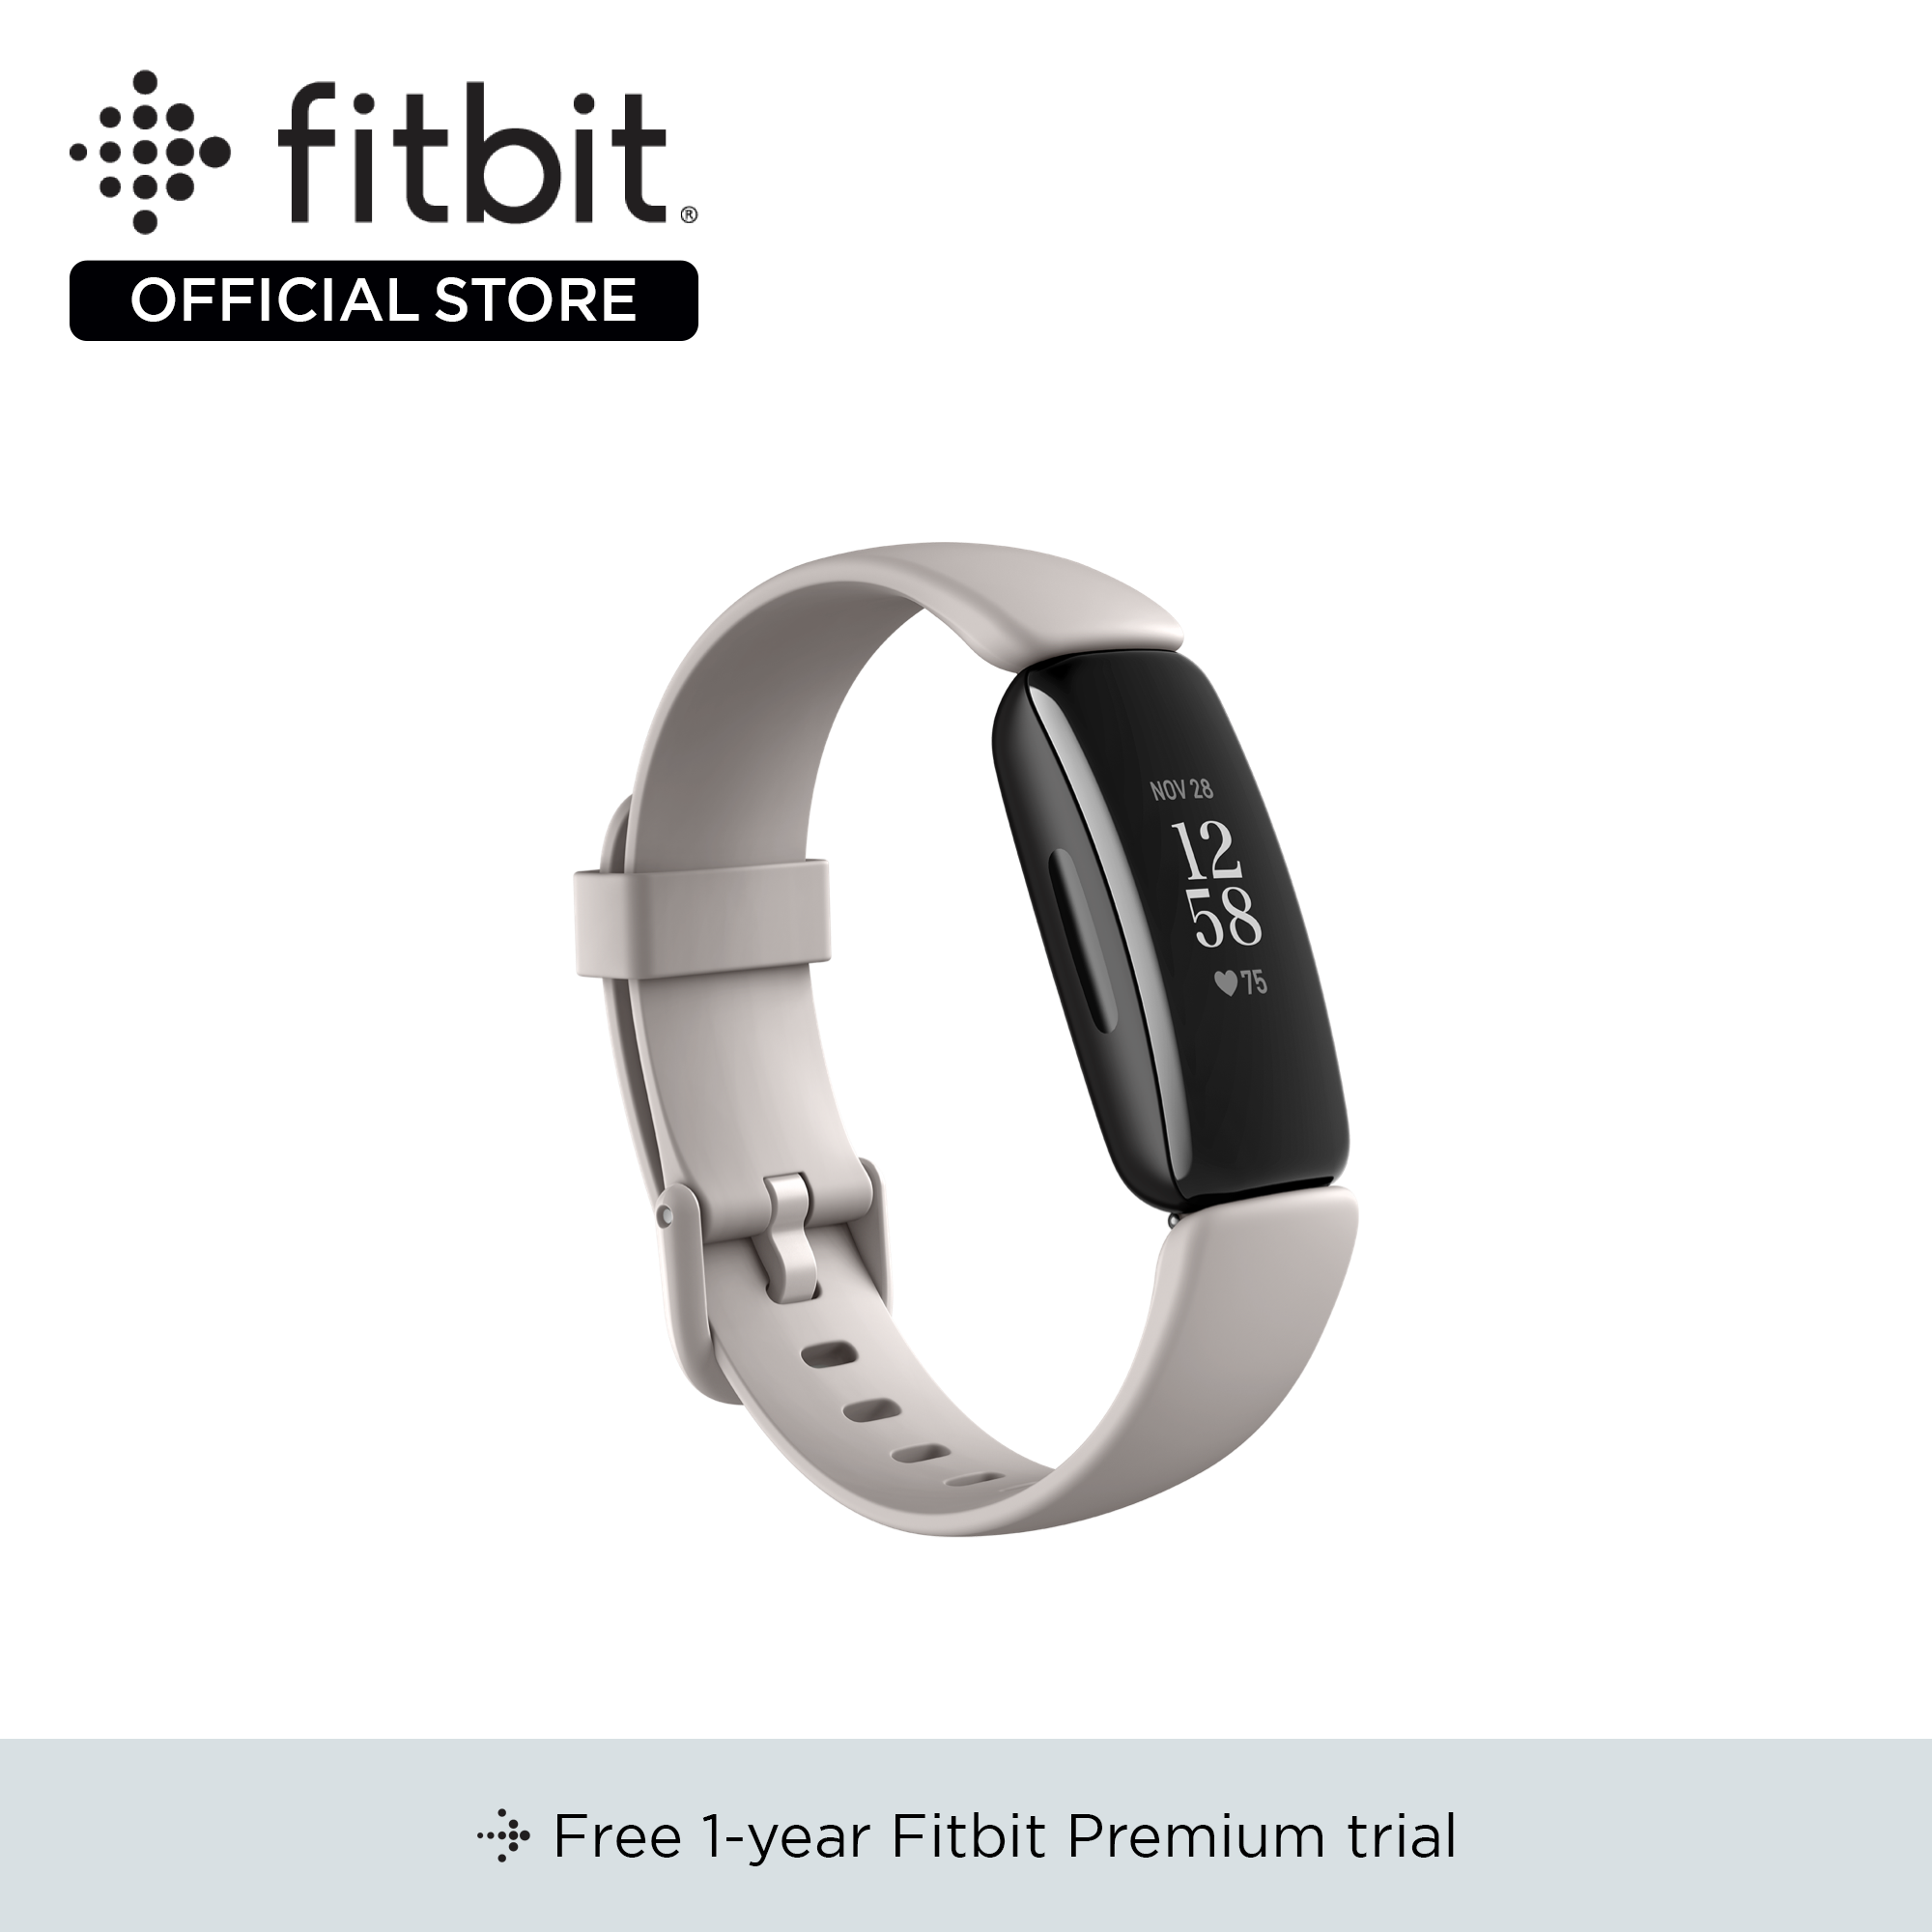 where can you buy a fitbit